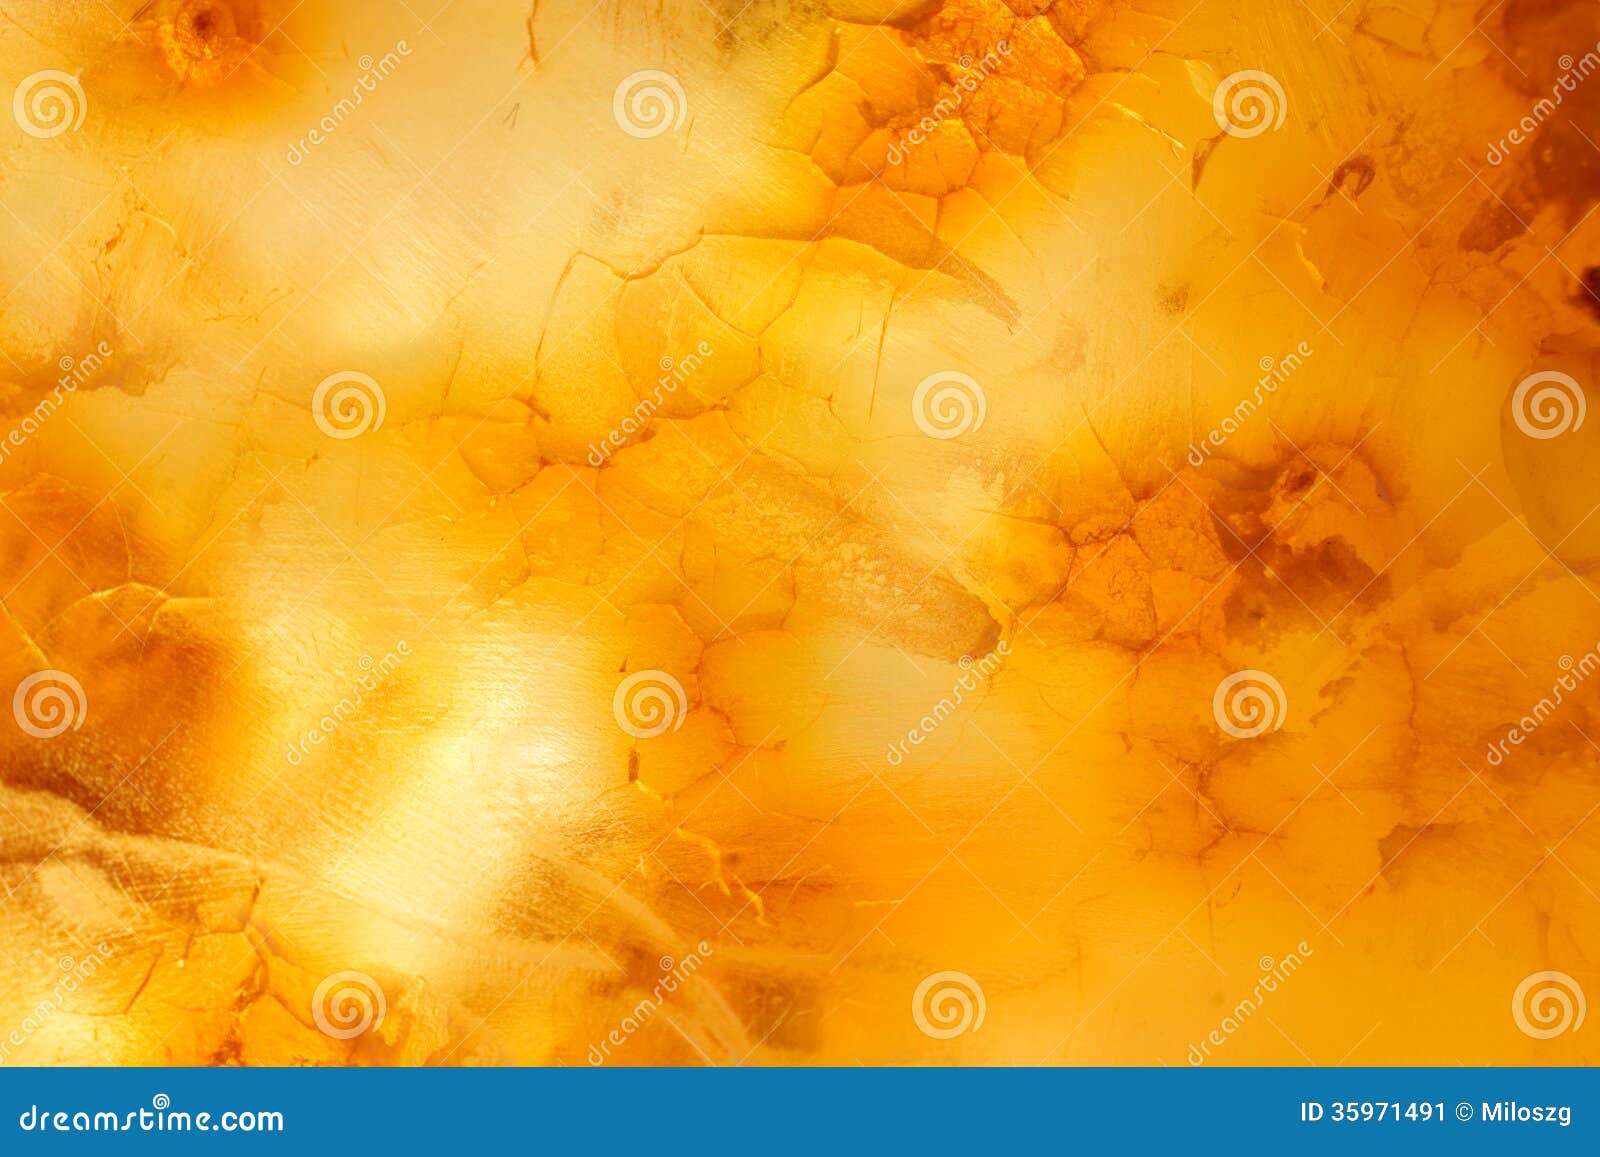 amber background or texture